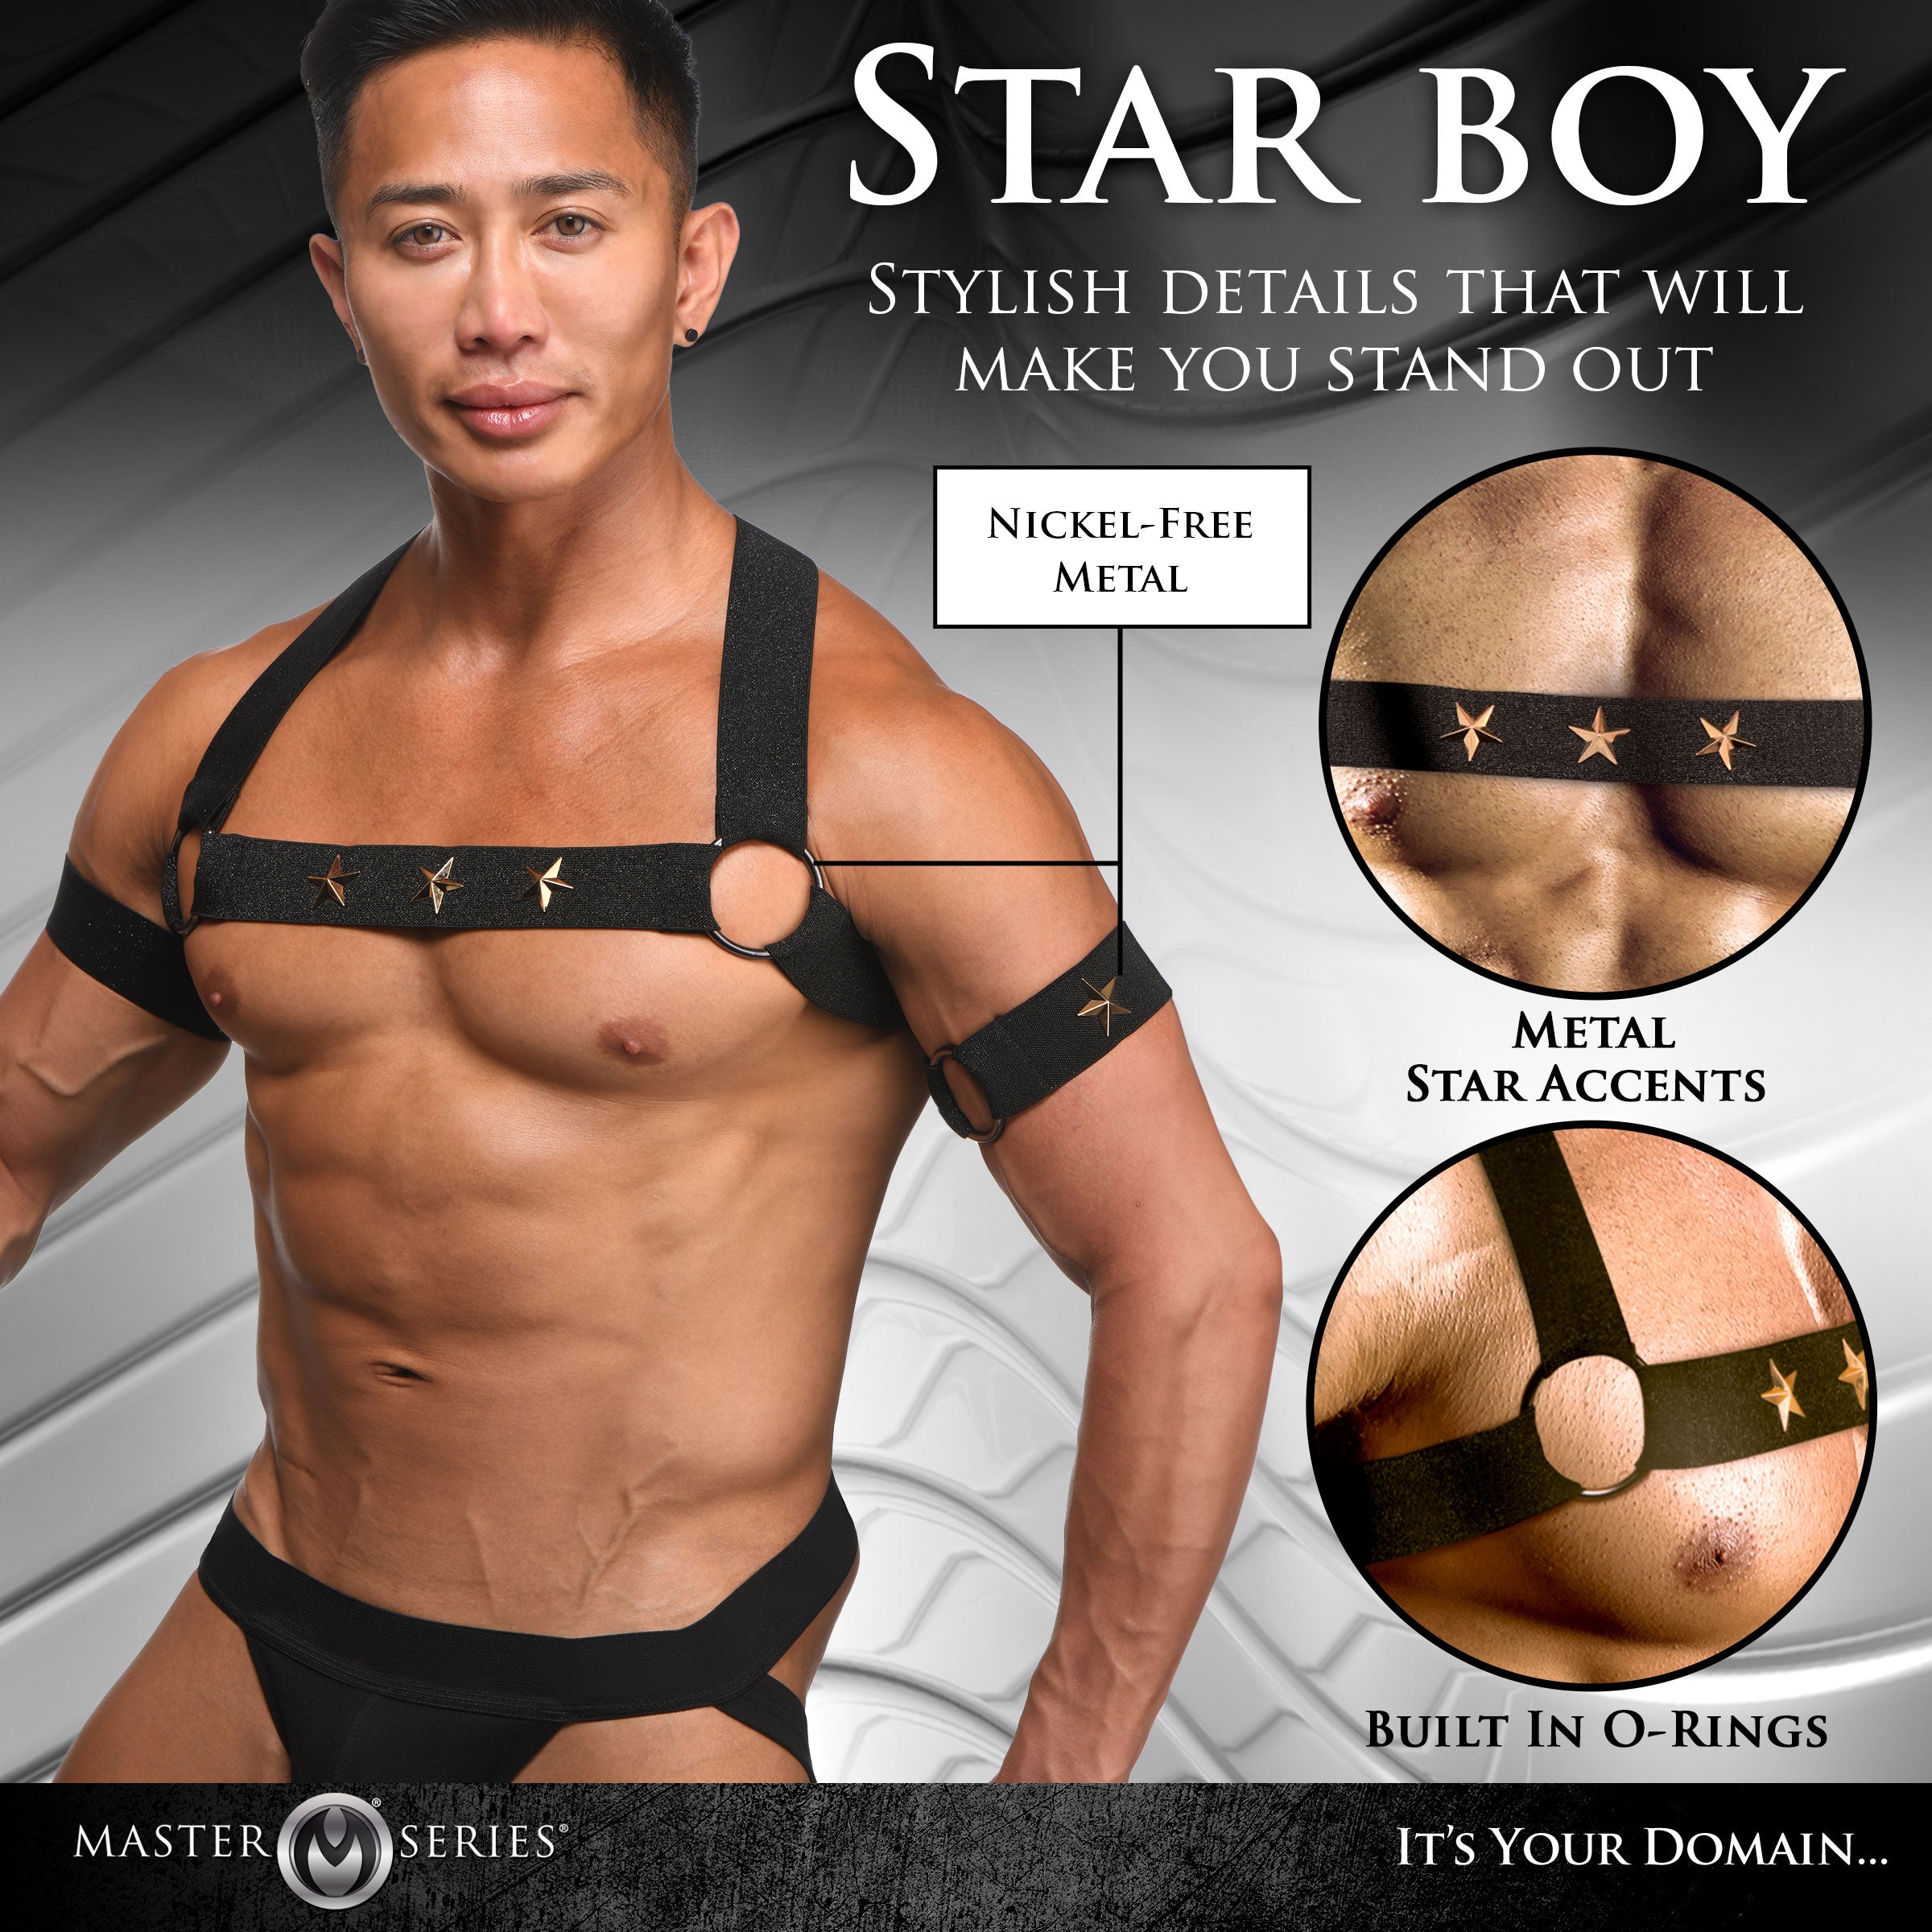 Rave Harness Elastic Chest Harness With Arm Bands -